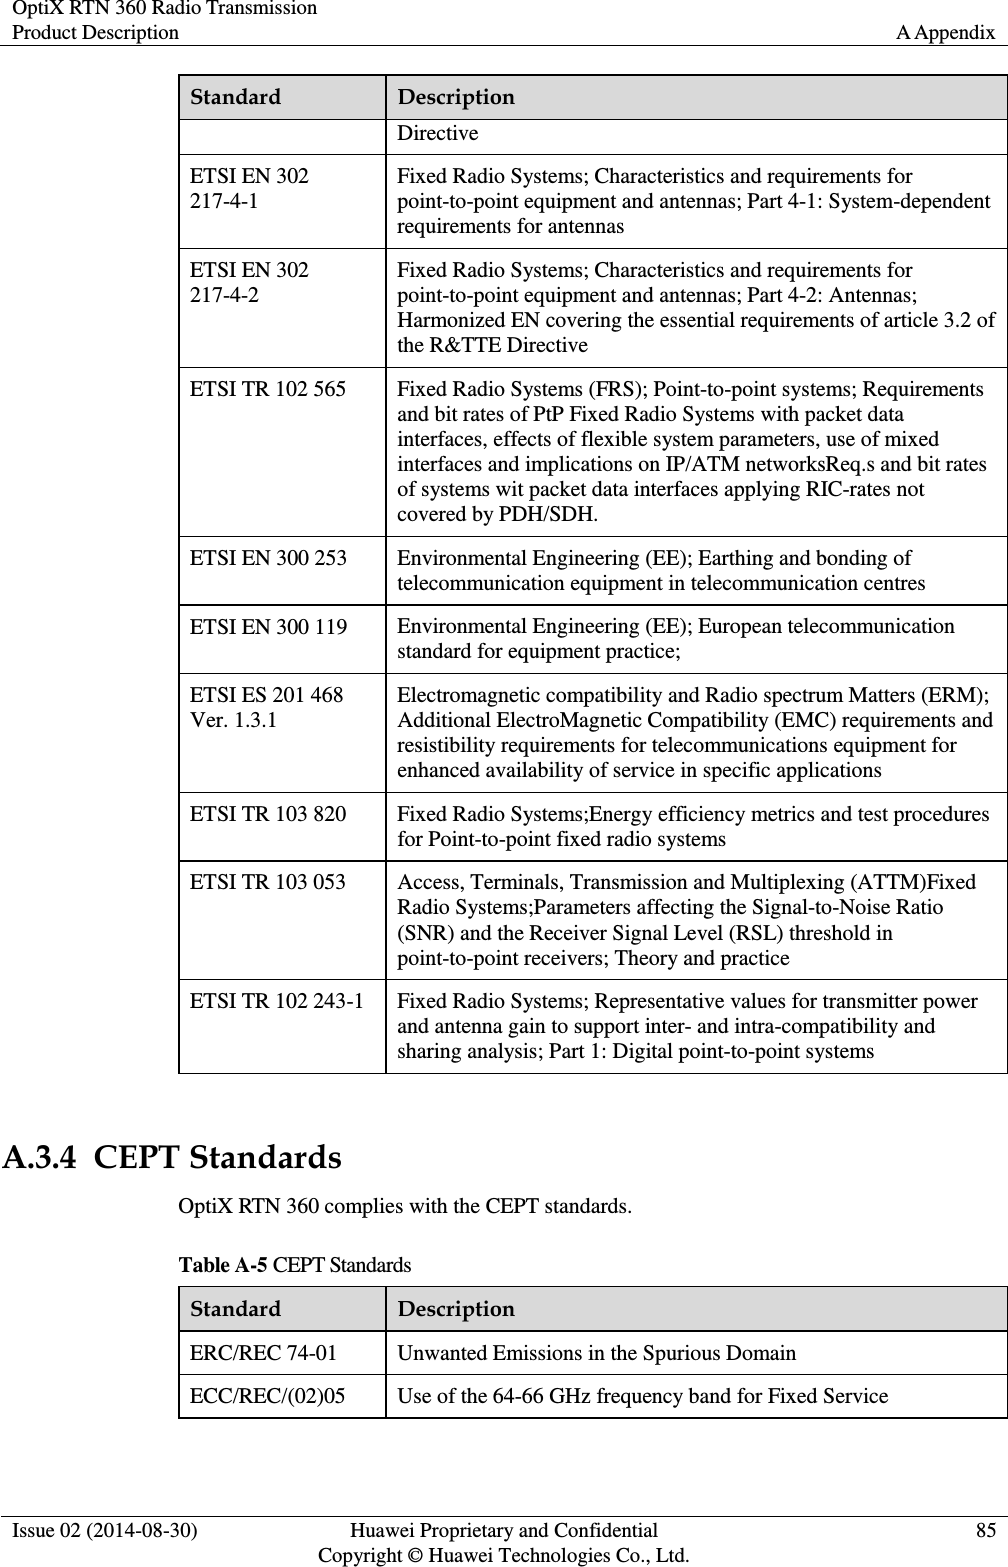 OptiX RTN 360 Radio Transmission Product Description A Appendix  Issue 02 (2014-08-30) Huawei Proprietary and Confidential                                     Copyright © Huawei Technologies Co., Ltd. 85  Standard Description Directive   ETSI EN 302 217-4-1 Fixed Radio Systems; Characteristics and requirements for point-to-point equipment and antennas; Part 4-1: System-dependent requirements for antennas ETSI EN 302 217-4-2 Fixed Radio Systems; Characteristics and requirements for point-to-point equipment and antennas; Part 4-2: Antennas; Harmonized EN covering the essential requirements of article 3.2 of the R&amp;TTE Directive ETSI TR 102 565 Fixed Radio Systems (FRS); Point-to-point systems; Requirements and bit rates of PtP Fixed Radio Systems with packet data interfaces, effects of flexible system parameters, use of mixed interfaces and implications on IP/ATM networksReq.s and bit rates of systems wit packet data interfaces applying RIC-rates not covered by PDH/SDH.   ETSI EN 300 253 Environmental Engineering (EE); Earthing and bonding of telecommunication equipment in telecommunication centres ETSI EN 300 119 Environmental Engineering (EE); European telecommunication standard for equipment practice; ETSI ES 201 468 Ver. 1.3.1   Electromagnetic compatibility and Radio spectrum Matters (ERM); Additional ElectroMagnetic Compatibility (EMC) requirements and resistibility requirements for telecommunications equipment for enhanced availability of service in specific applications   ETSI TR 103 820     Fixed Radio Systems;Energy efficiency metrics and test procedures for Point-to-point fixed radio systems ETSI TR 103 053     Access, Terminals, Transmission and Multiplexing (ATTM)Fixed Radio Systems;Parameters affecting the Signal-to-Noise Ratio (SNR) and the Receiver Signal Level (RSL) threshold in point-to-point receivers; Theory and practice   ETSI TR 102 243-1 Fixed Radio Systems; Representative values for transmitter power and antenna gain to support inter- and intra-compatibility and sharing analysis; Part 1: Digital point-to-point systems  A.3.4  CEPT Standards OptiX RTN 360 complies with the CEPT standards. Table A-5 CEPT Standards Standard Description ERC/REC 74-01 Unwanted Emissions in the Spurious Domain ECC/REC/(02)05   Use of the 64-66 GHz frequency band for Fixed Service  